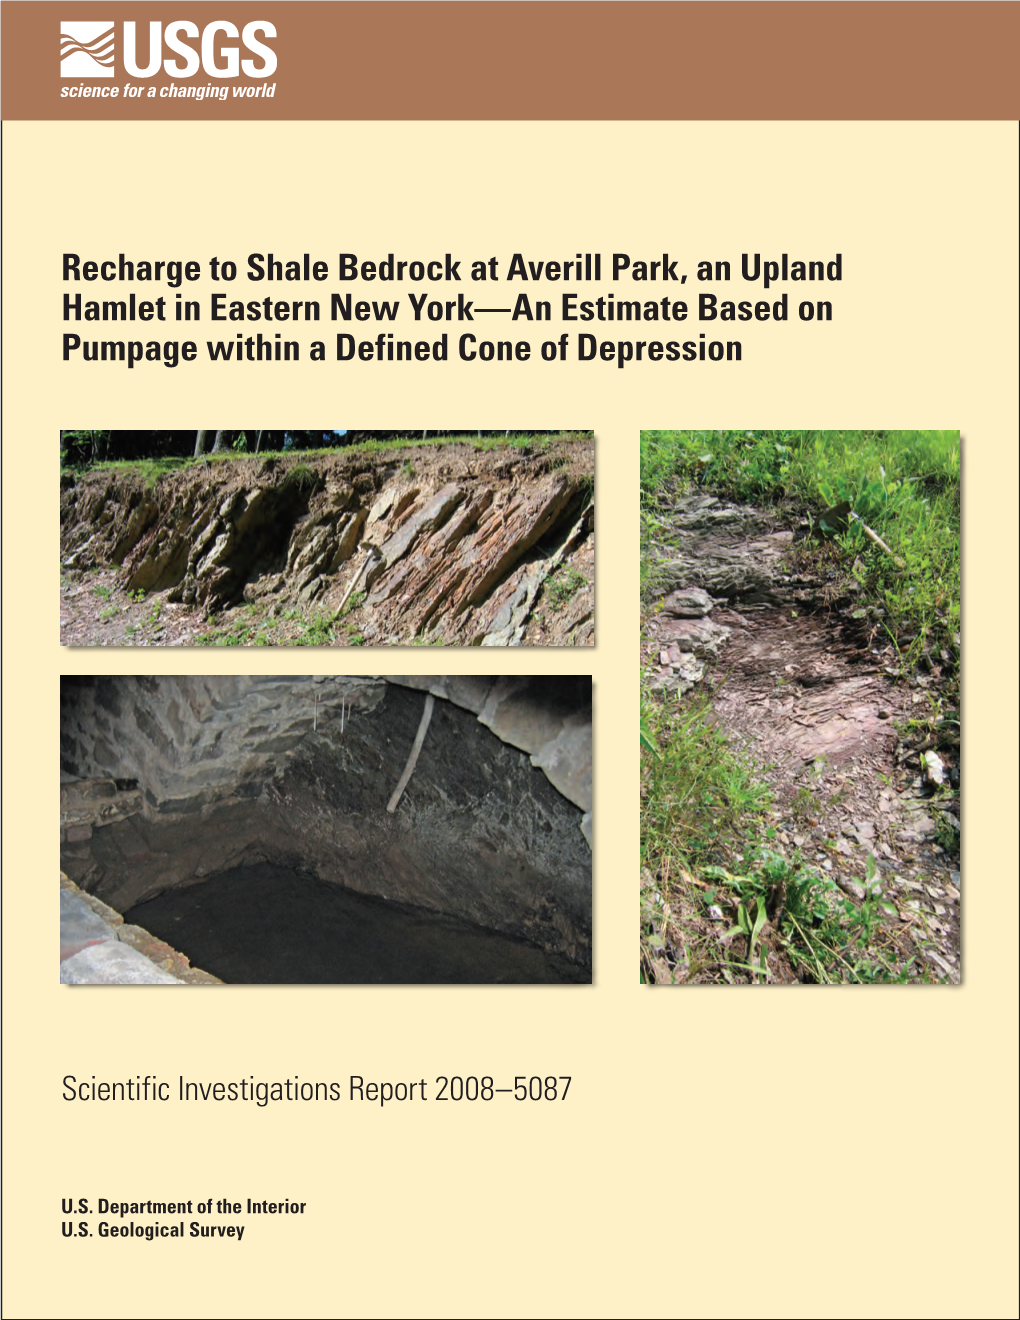 Recharge to Shale Bedrock at Averill Park, an Upland Hamlet in Eastern New York—An Estimate Based on Pumpage Within a Defined Cone of Depression